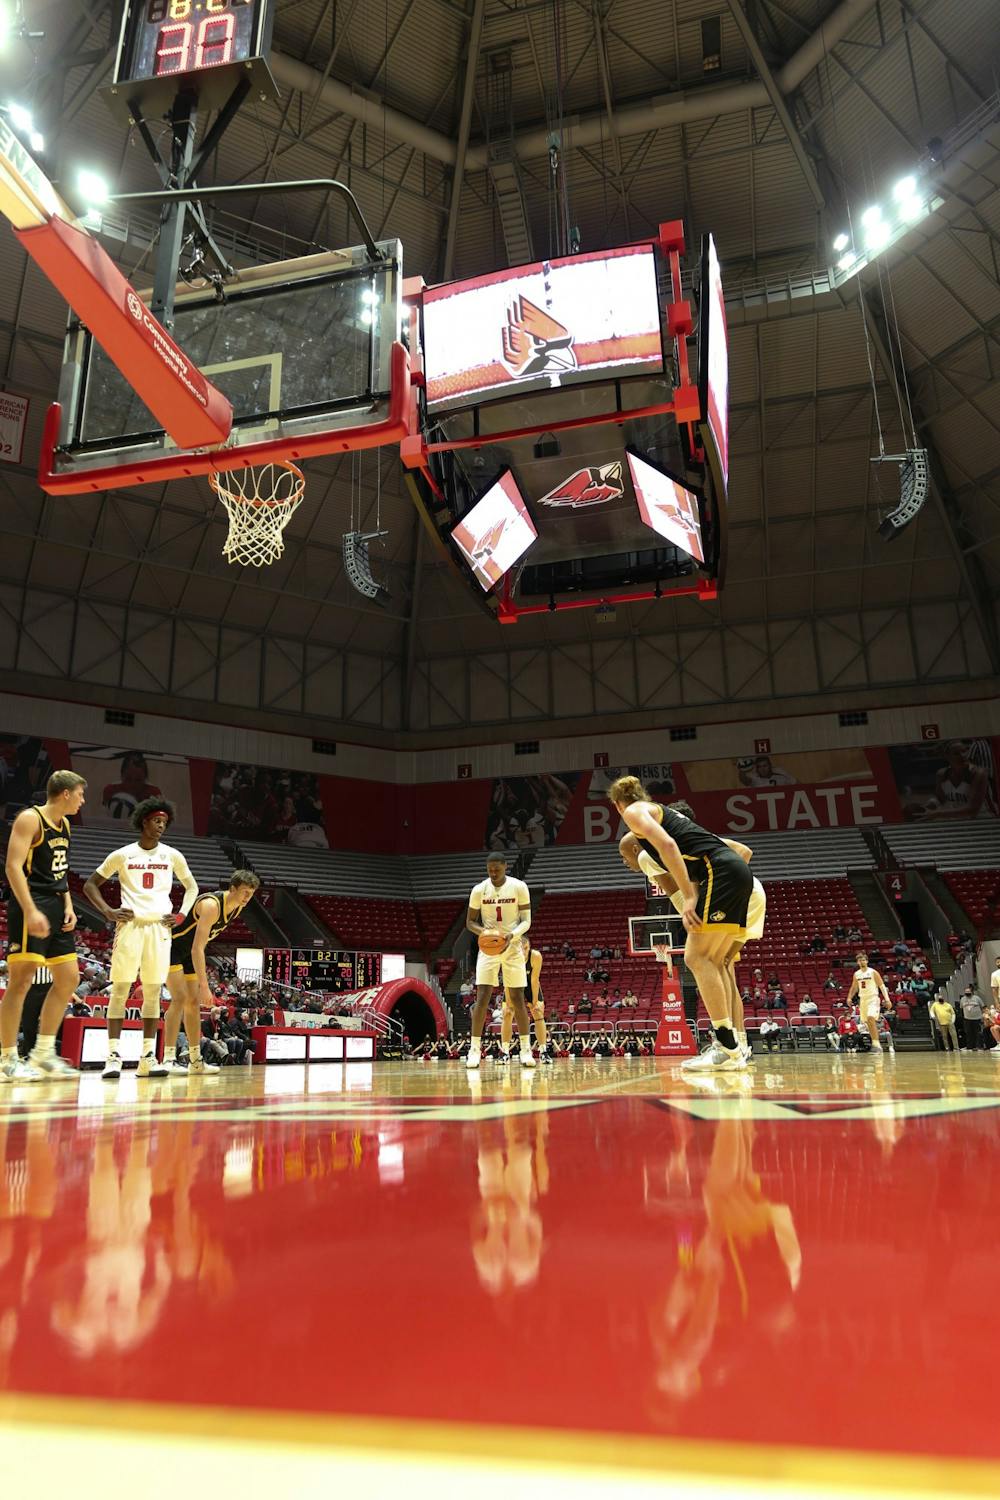 Growing together: Ball State Men’s Basketball hopes to usher in new talent quickly as they prepare for season 